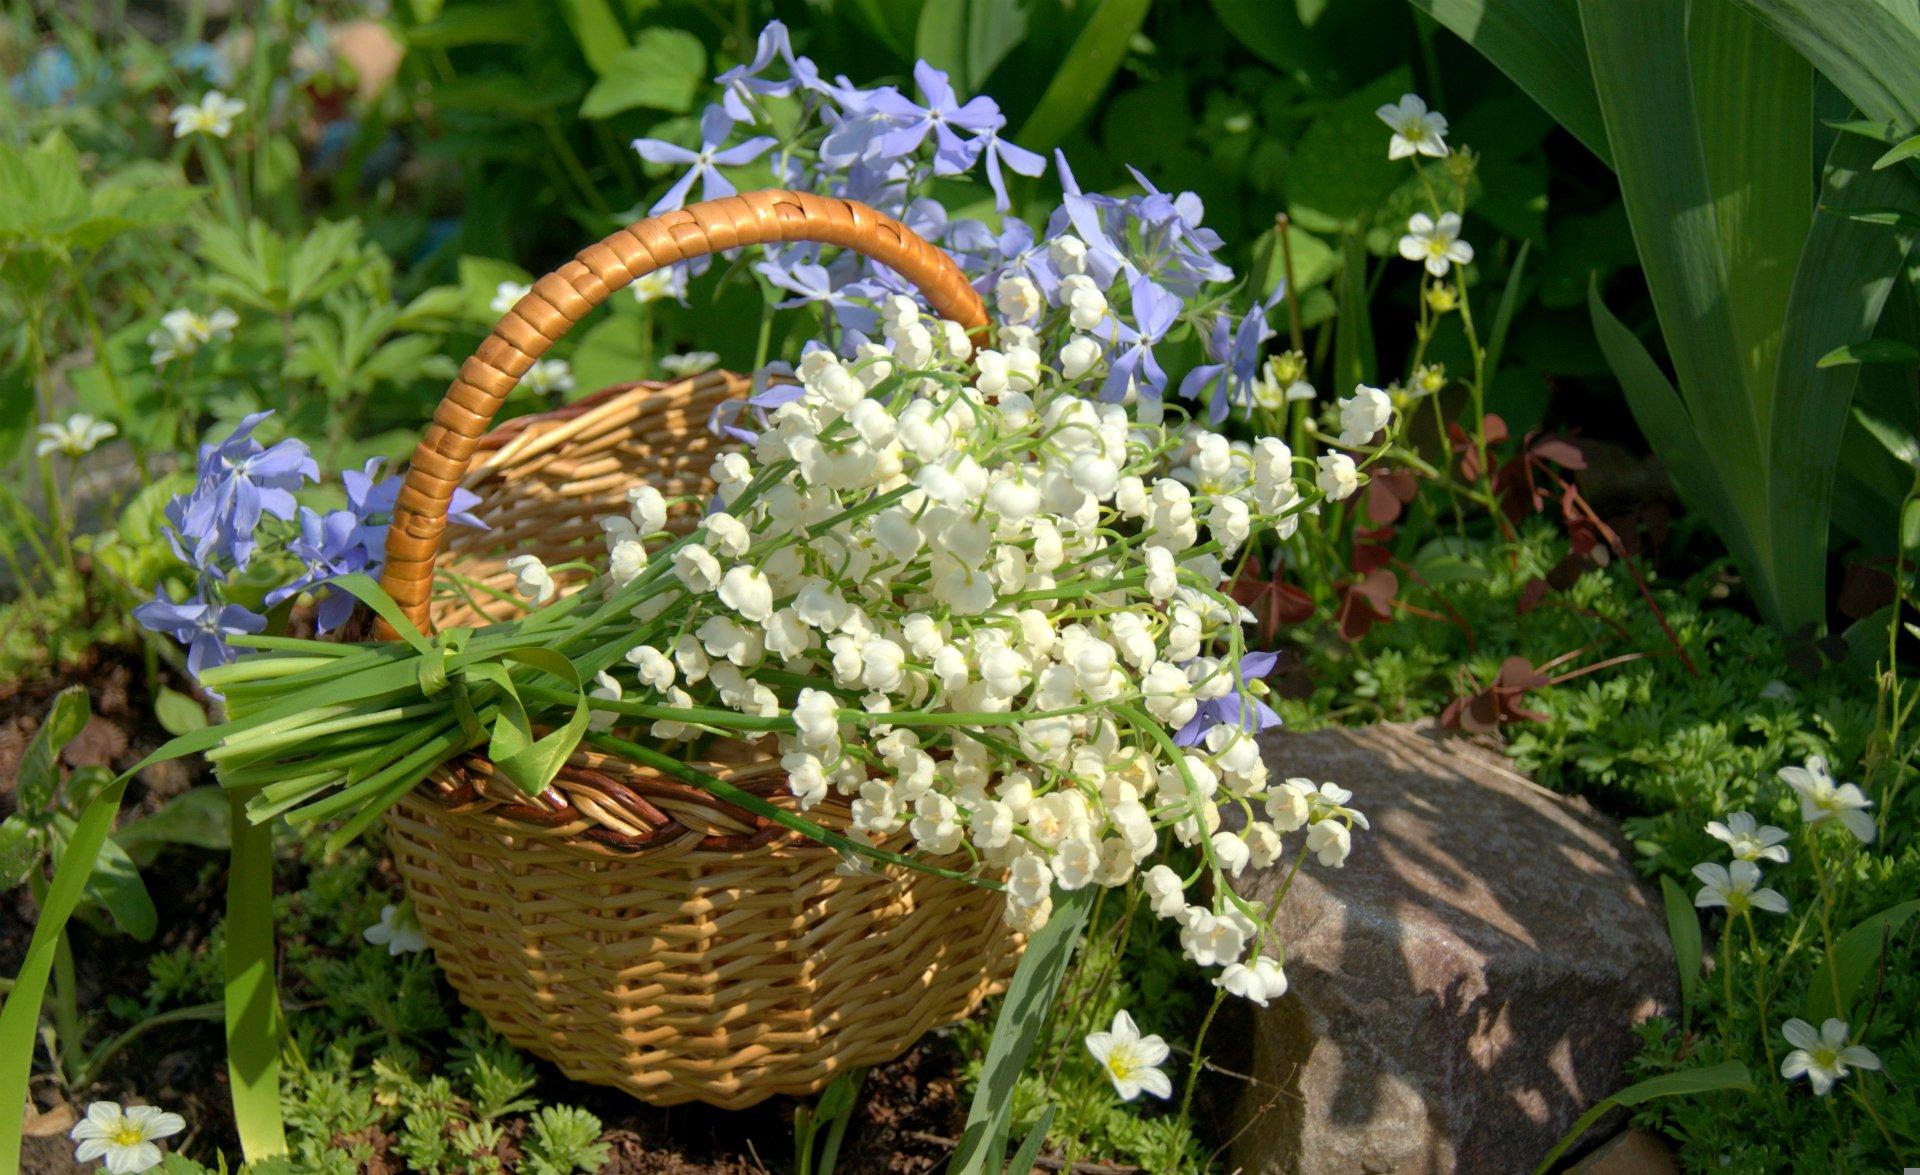 Lilies of the Valley in Basket HD Wallpaper. Background Image